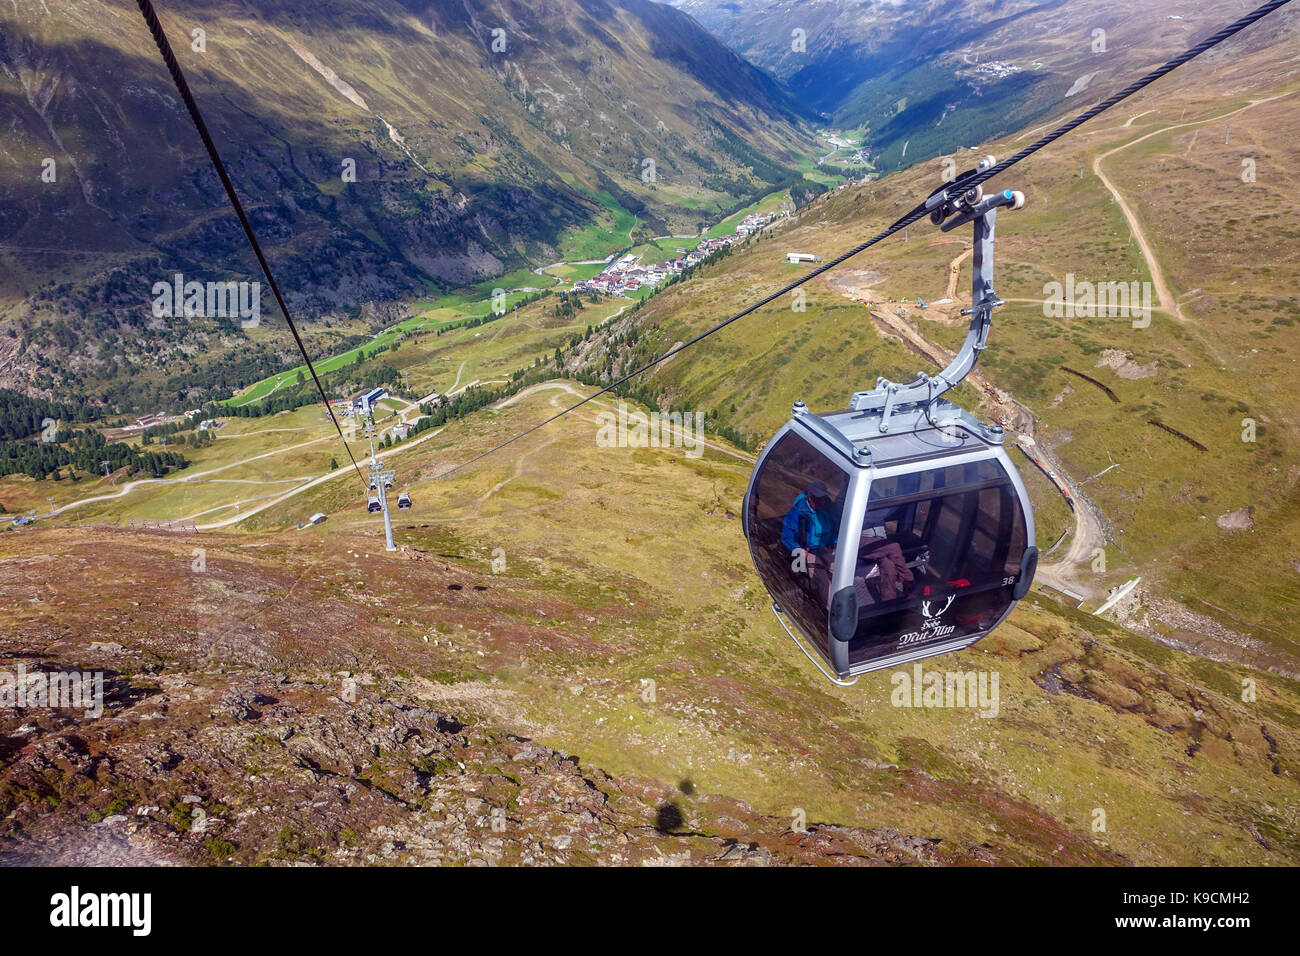 Oetztal valley and Obergurgl from Hohe Mut cablecar, Austria Stock Photo